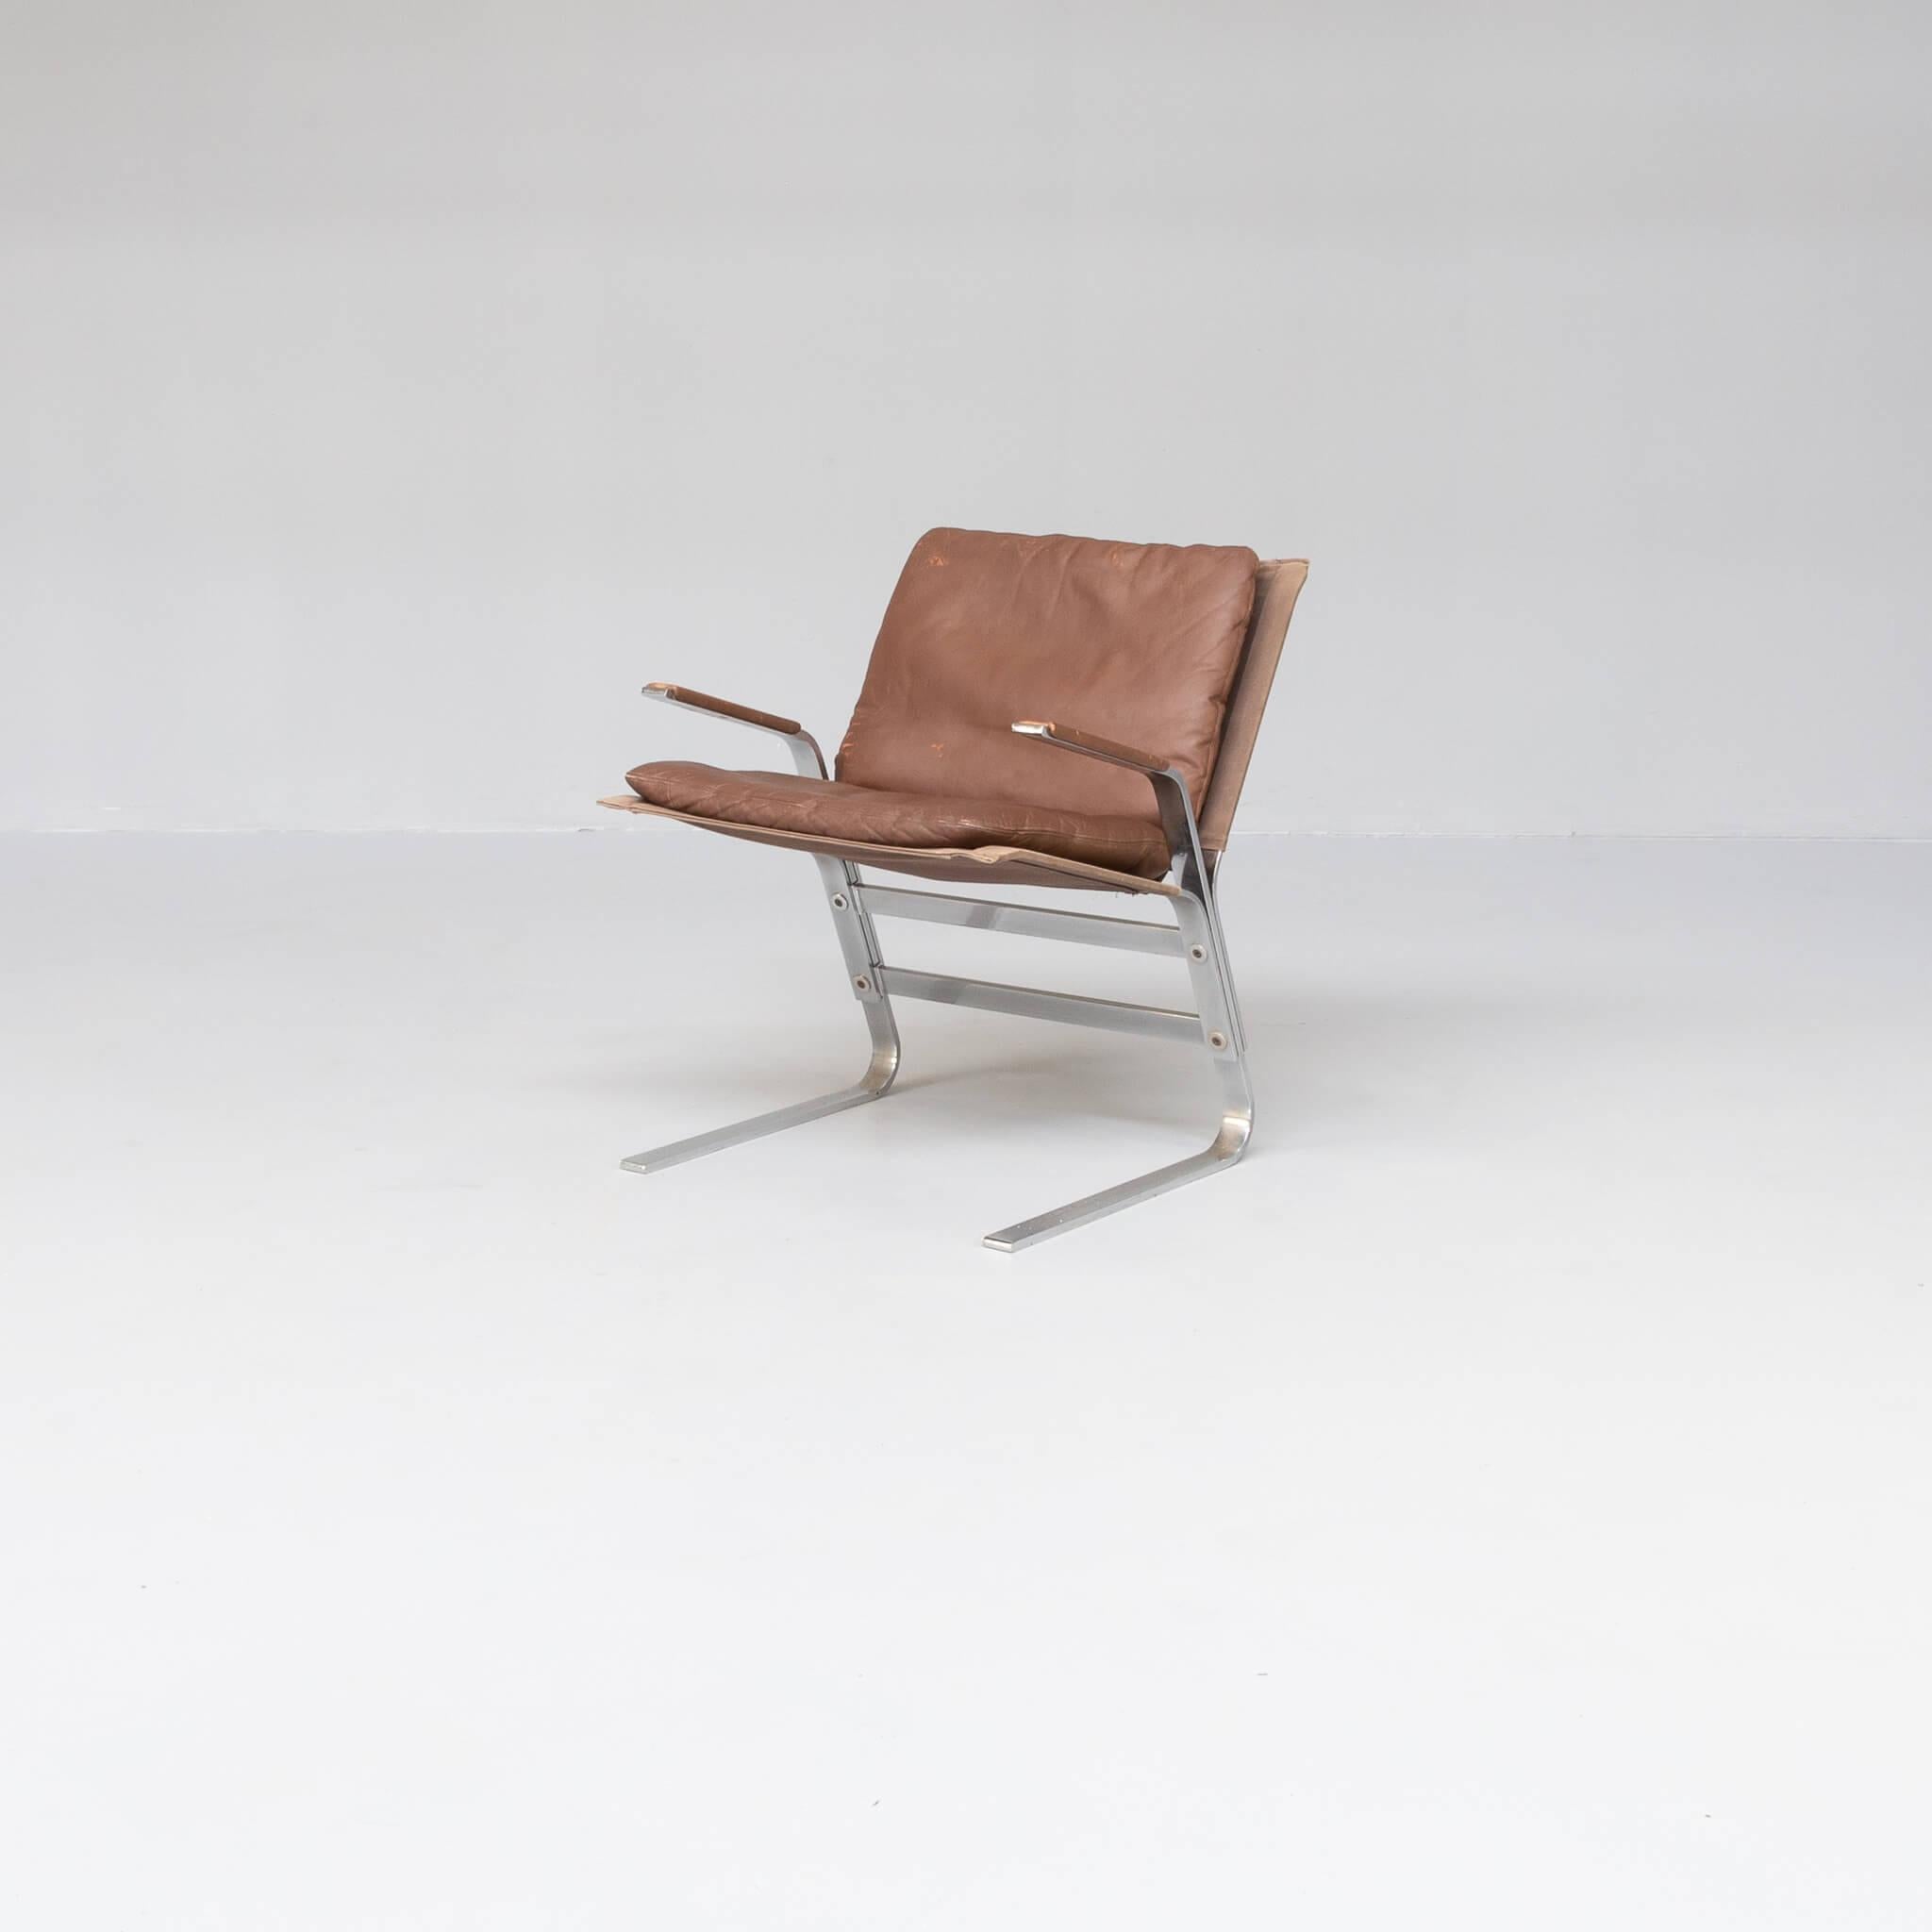 Modernist lines decorate the design of this beautiful lounge chair. It shows lines matching some Poltrona Frau designs. Metal chromed frame and canvas carry the leather cushions and gives this chair a timeless look. The chair is in good conditiion